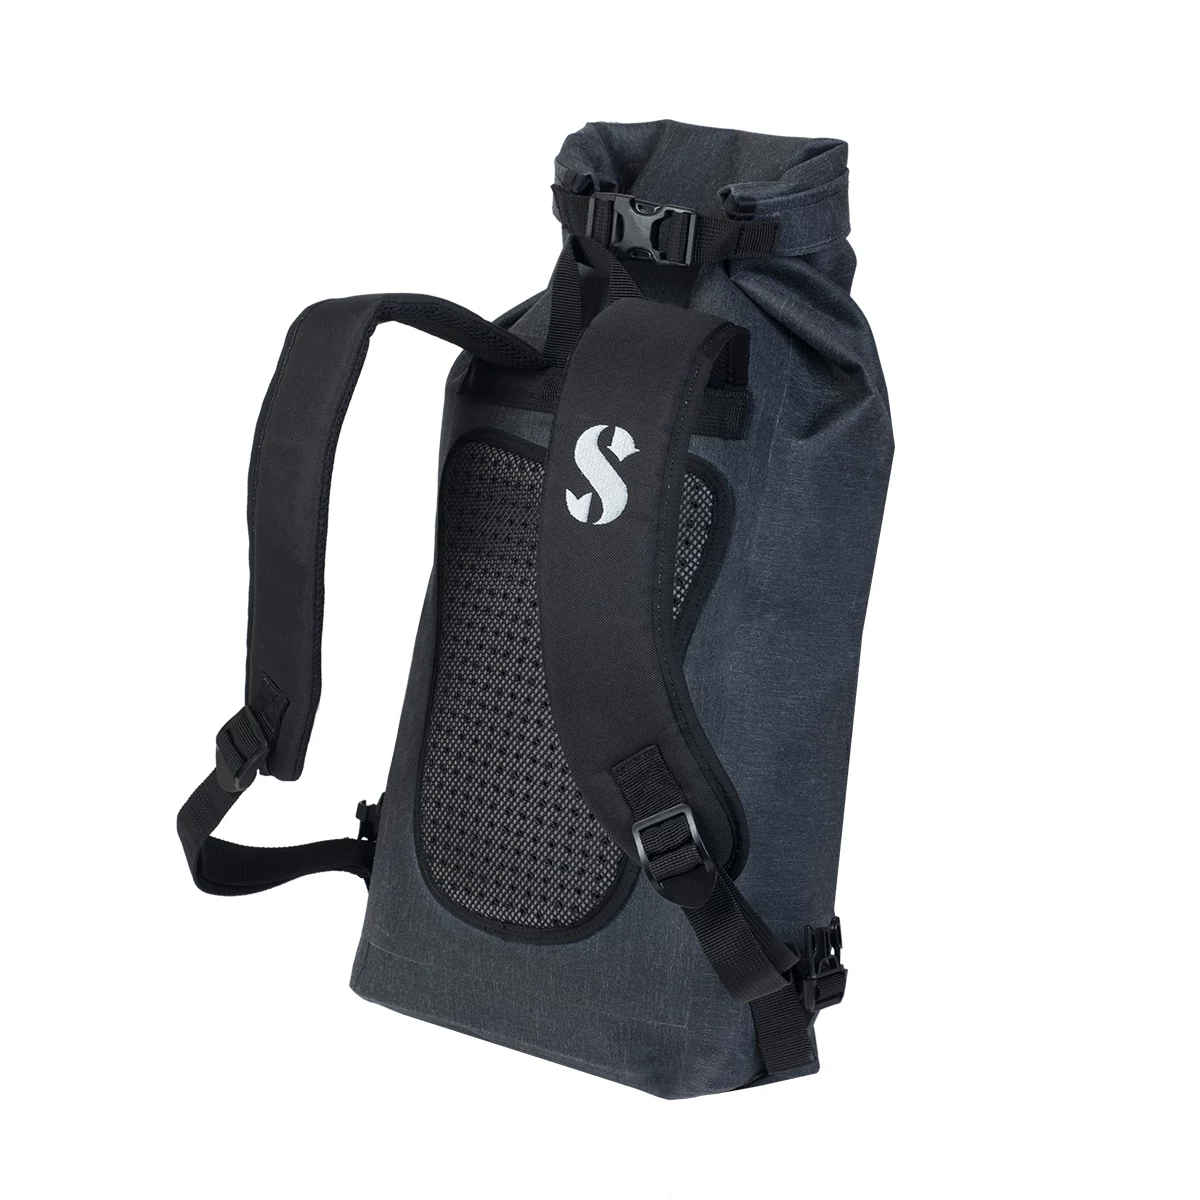 Rucksack straps waterproof drybag 85 L size Carry 2 or more wetsuits & more 